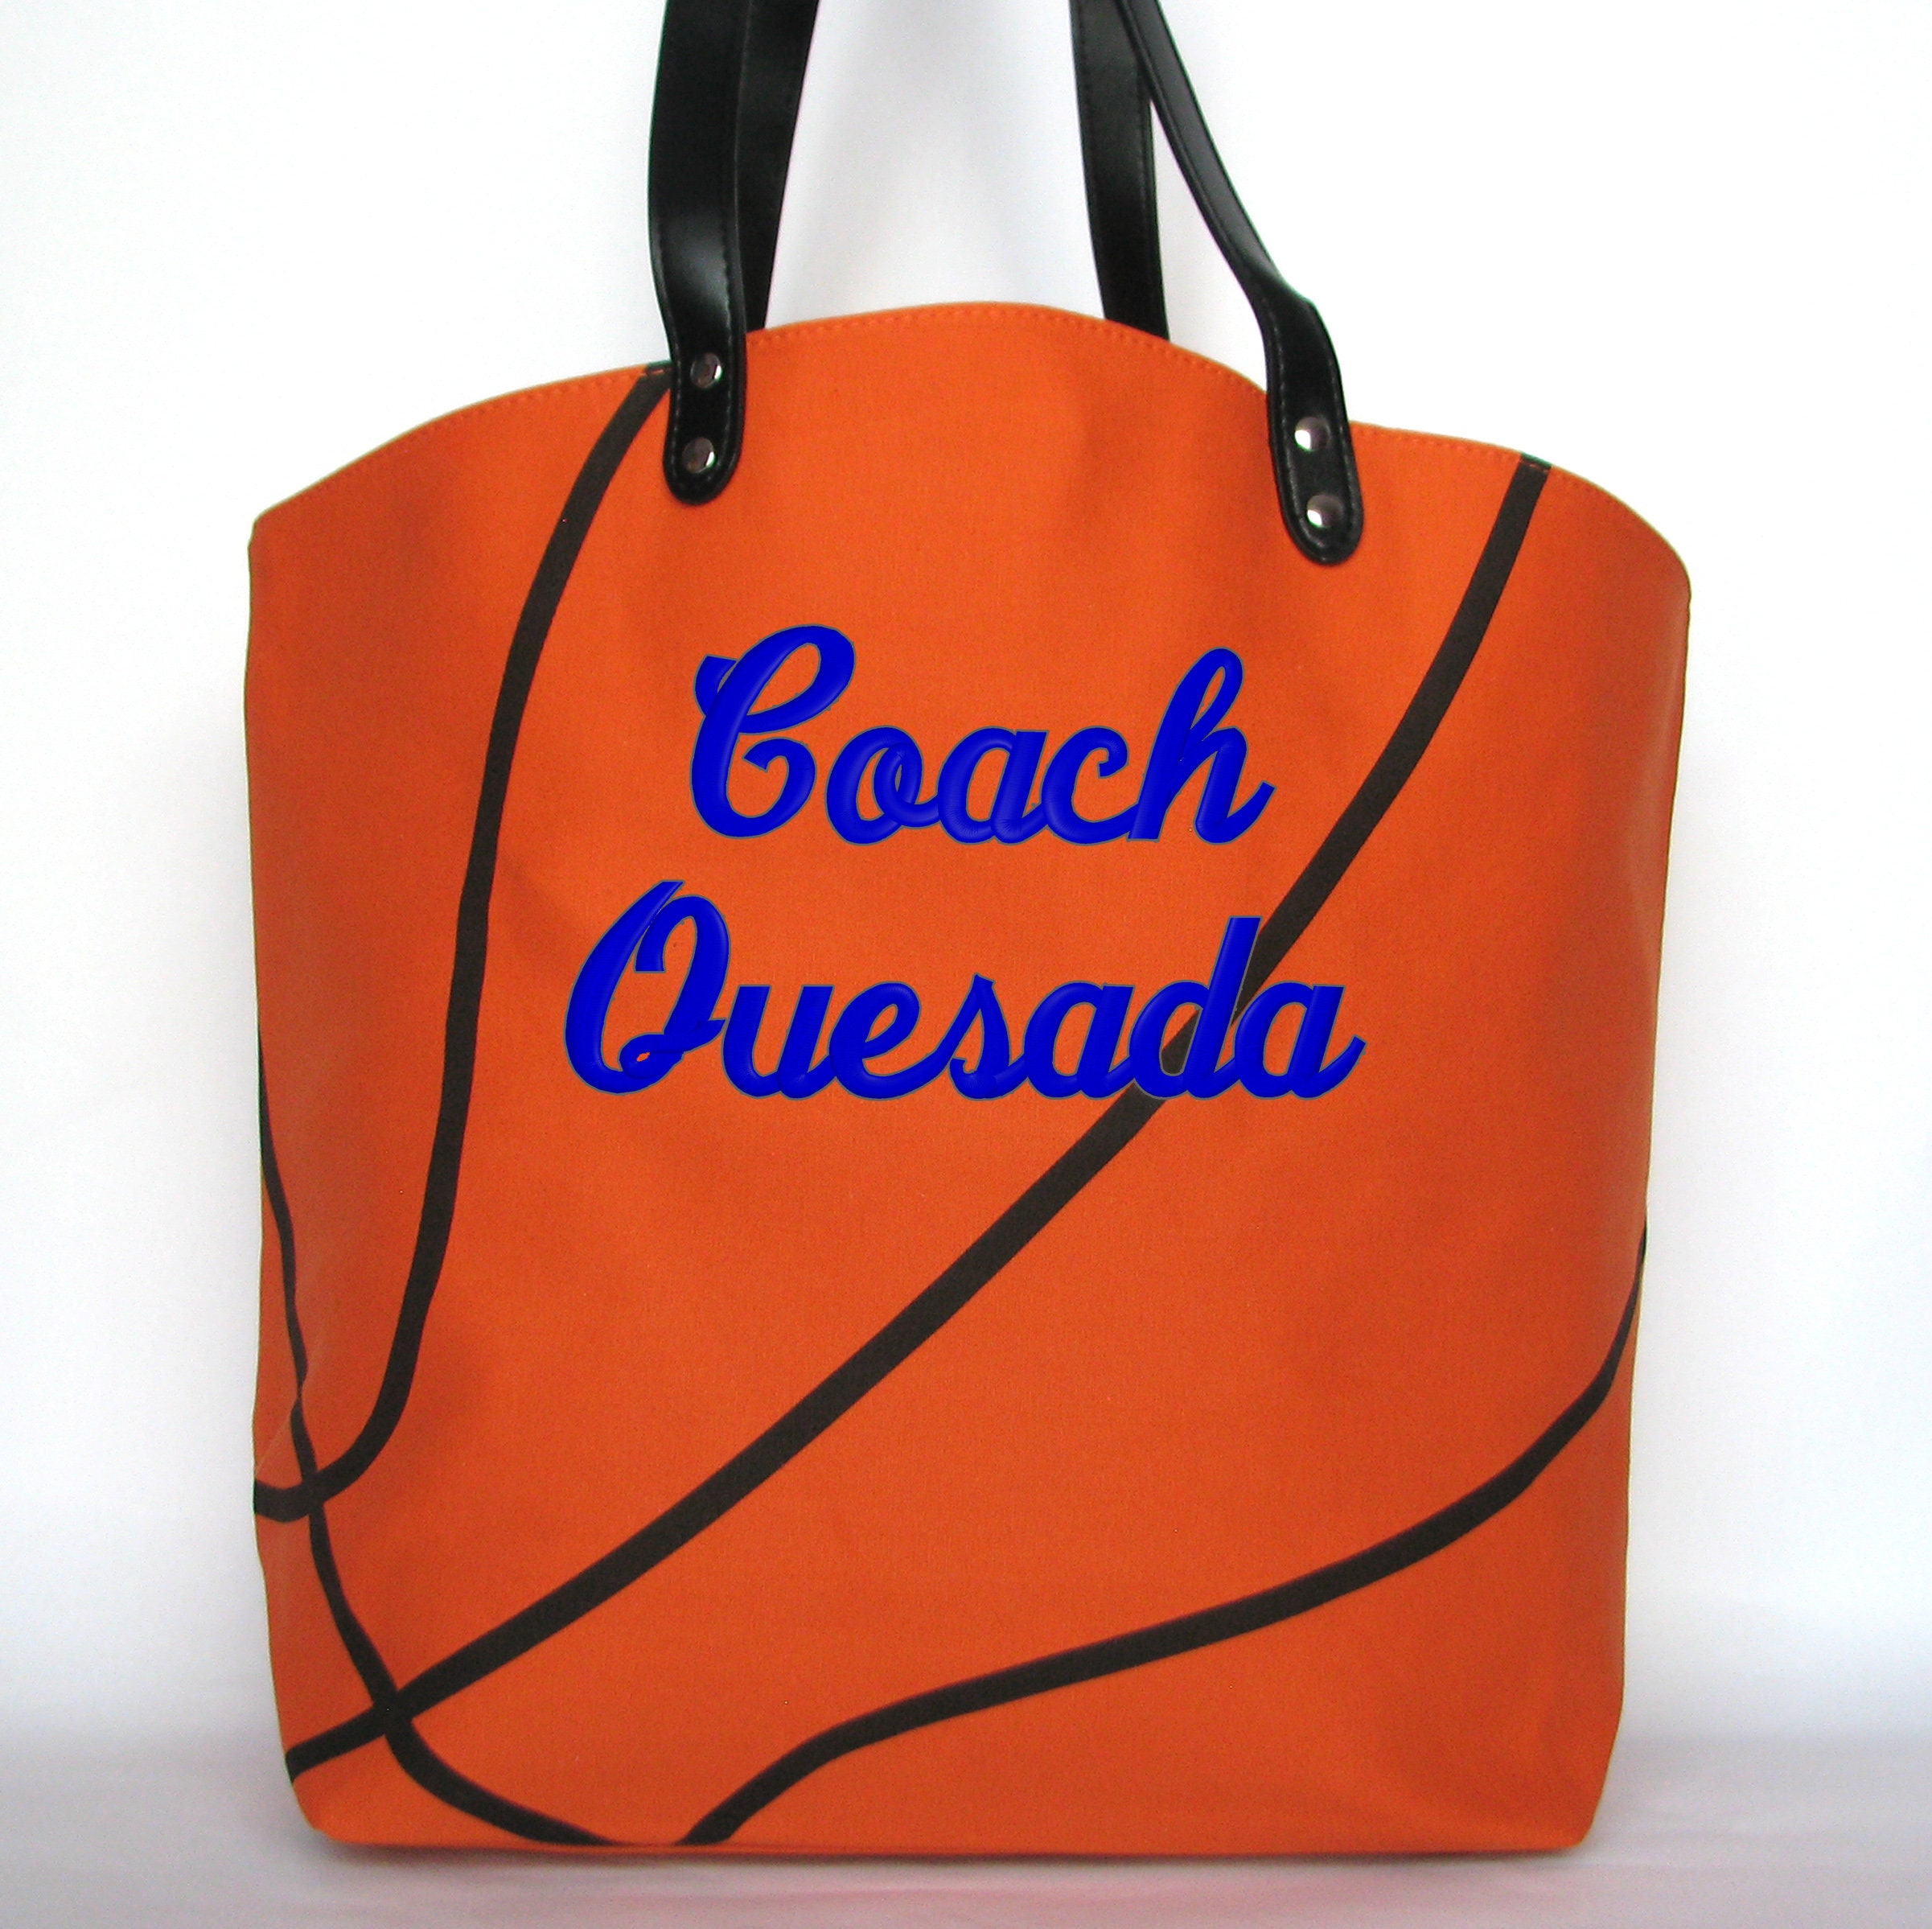 Coach gave me everything in this baby bag/carryall. I believe it